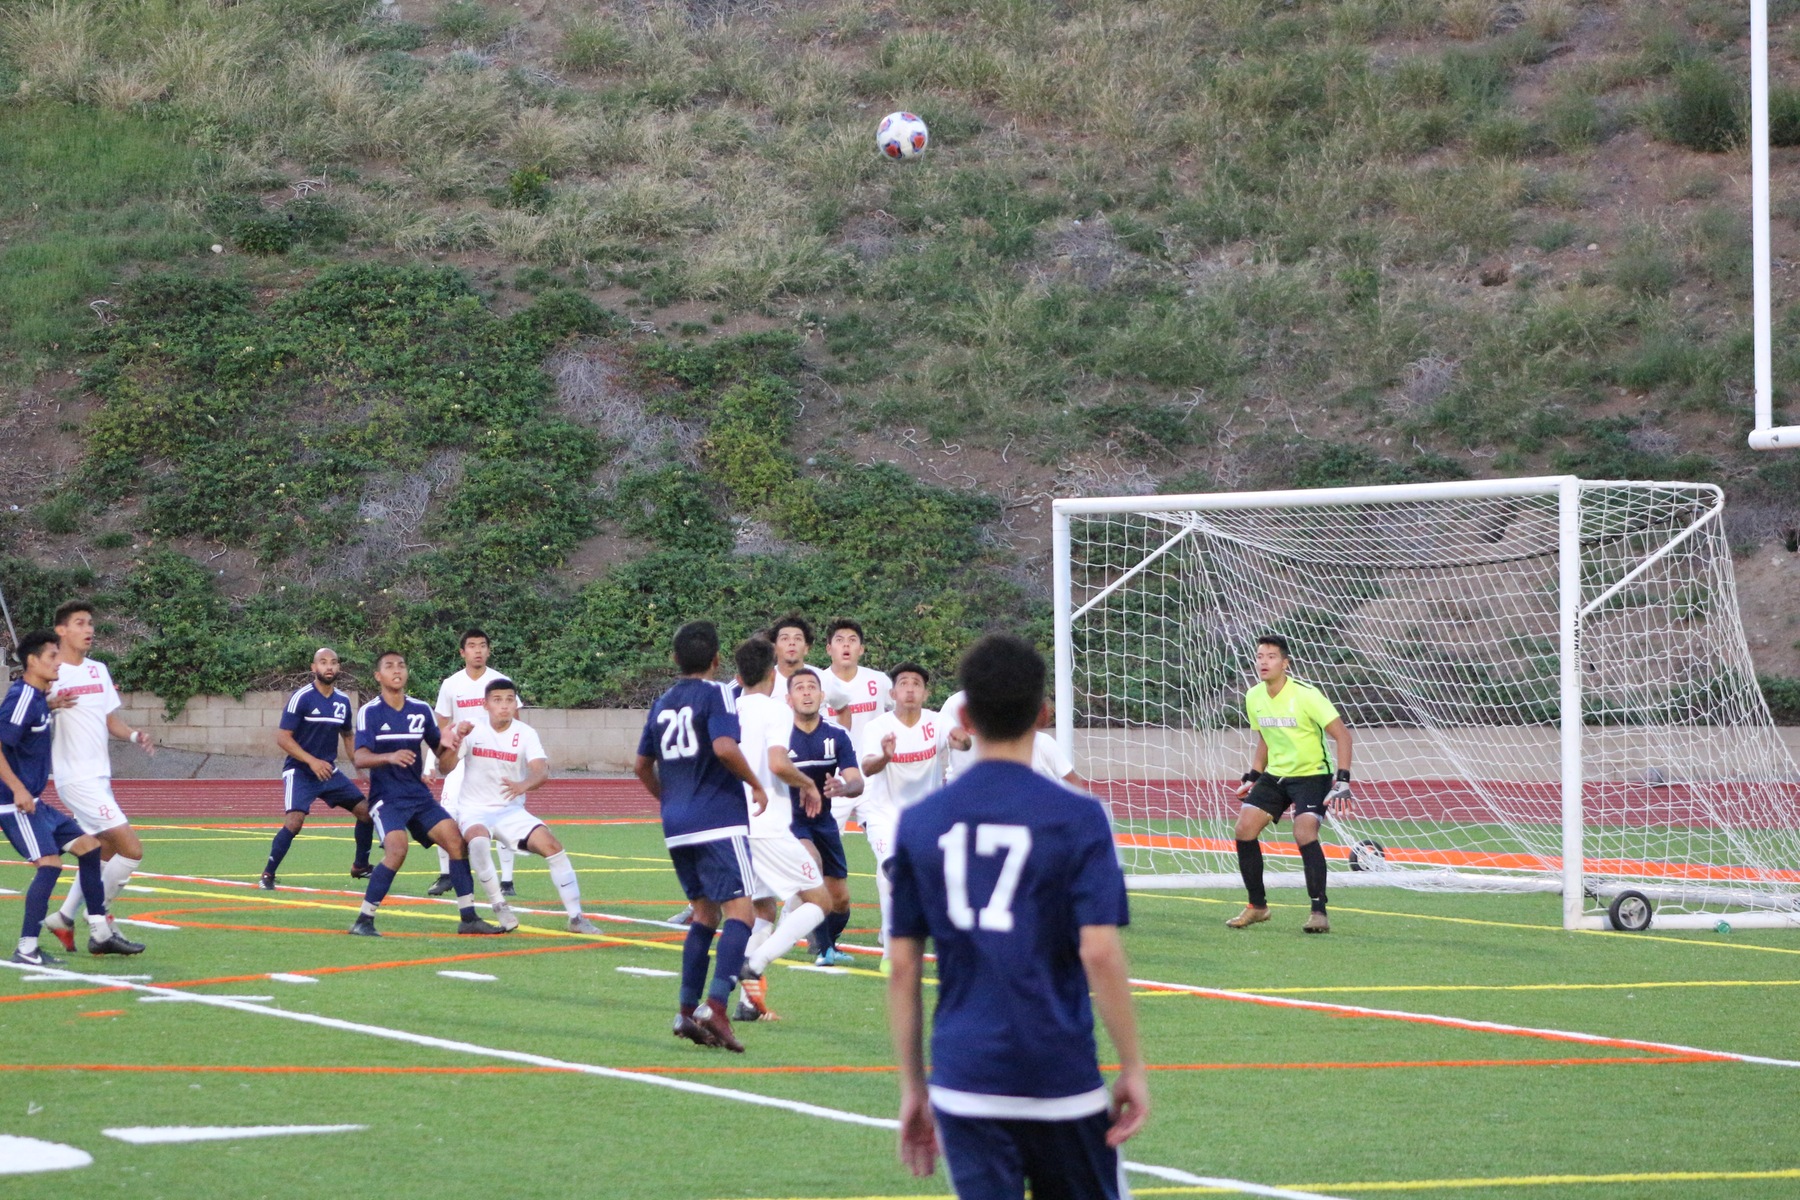 Patrick Luevano looks on as his throw-in approaches the Bakersfield goal. Image: Chris Peterson